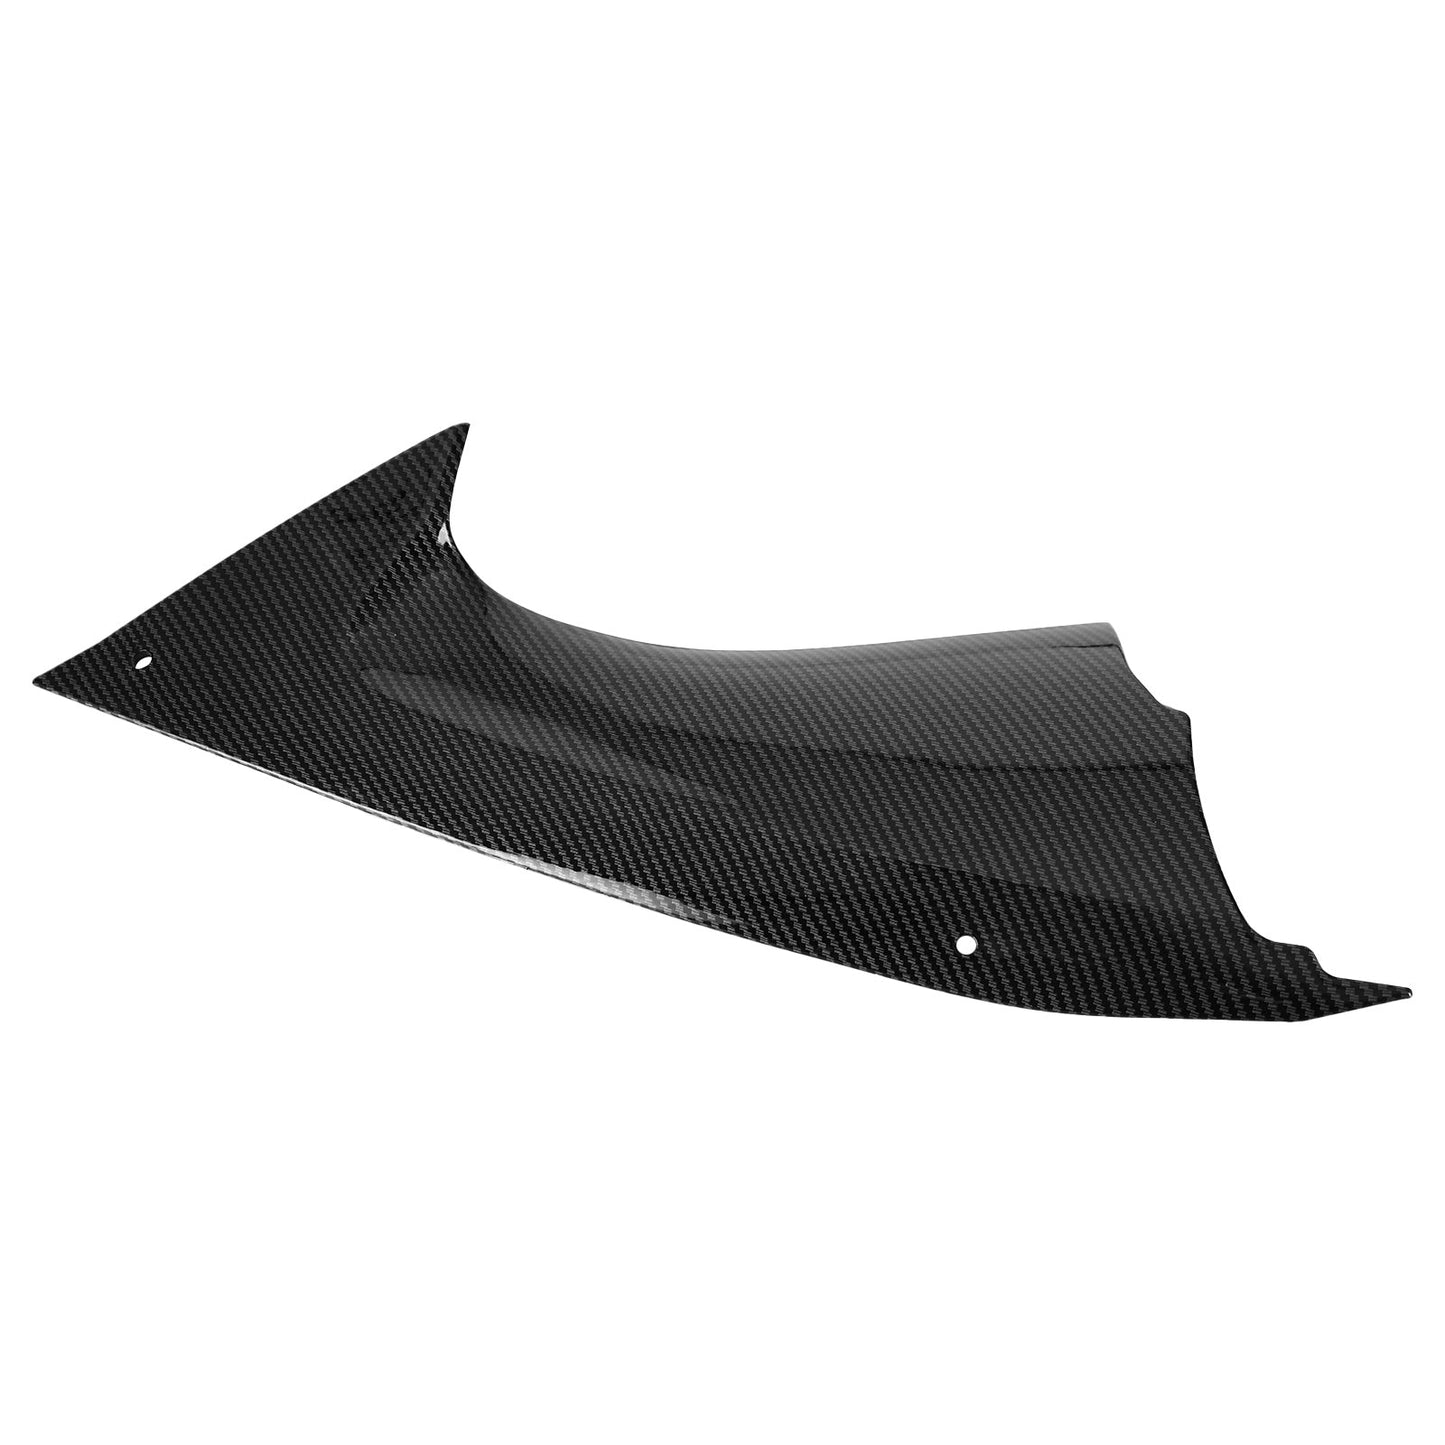 Gas Tank Side Cover Panel Trim Fairing Cowl for Yamaha YZF YZFR6 R6 2008-2014 Carbon